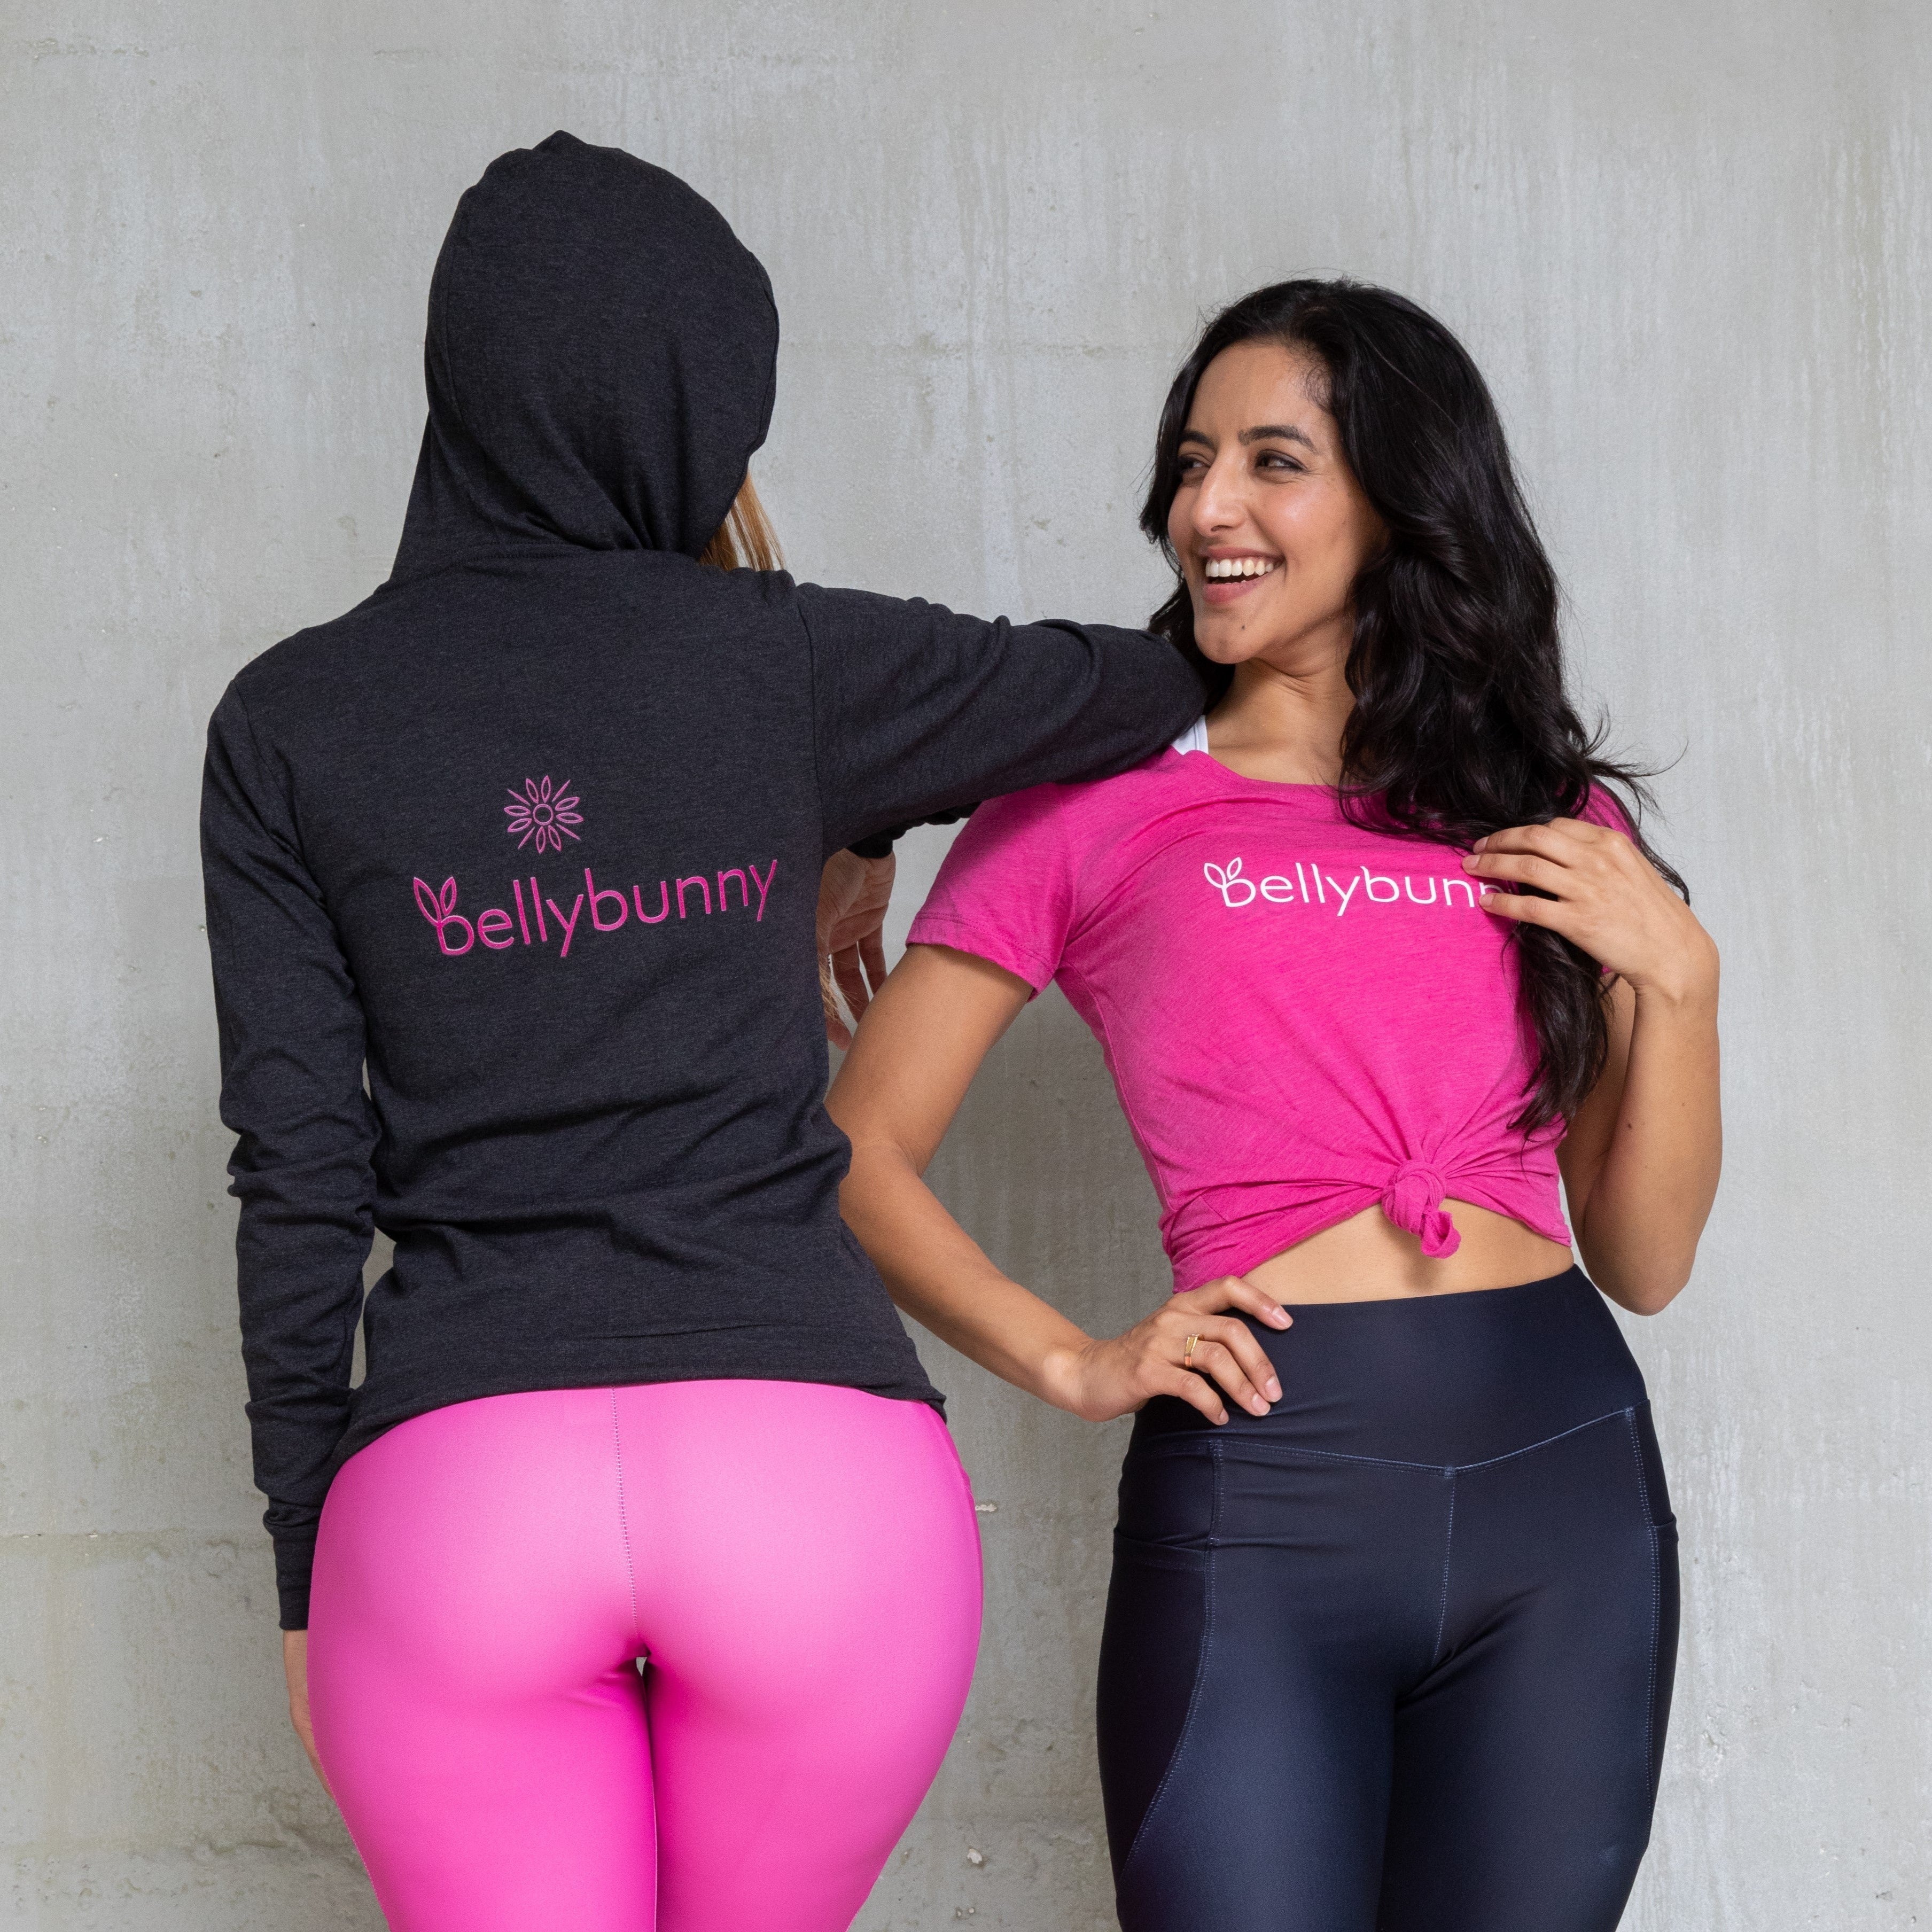 Bellybunny Women's Zip-Up Hoodie-Charcoal black Triblend-with pink logo